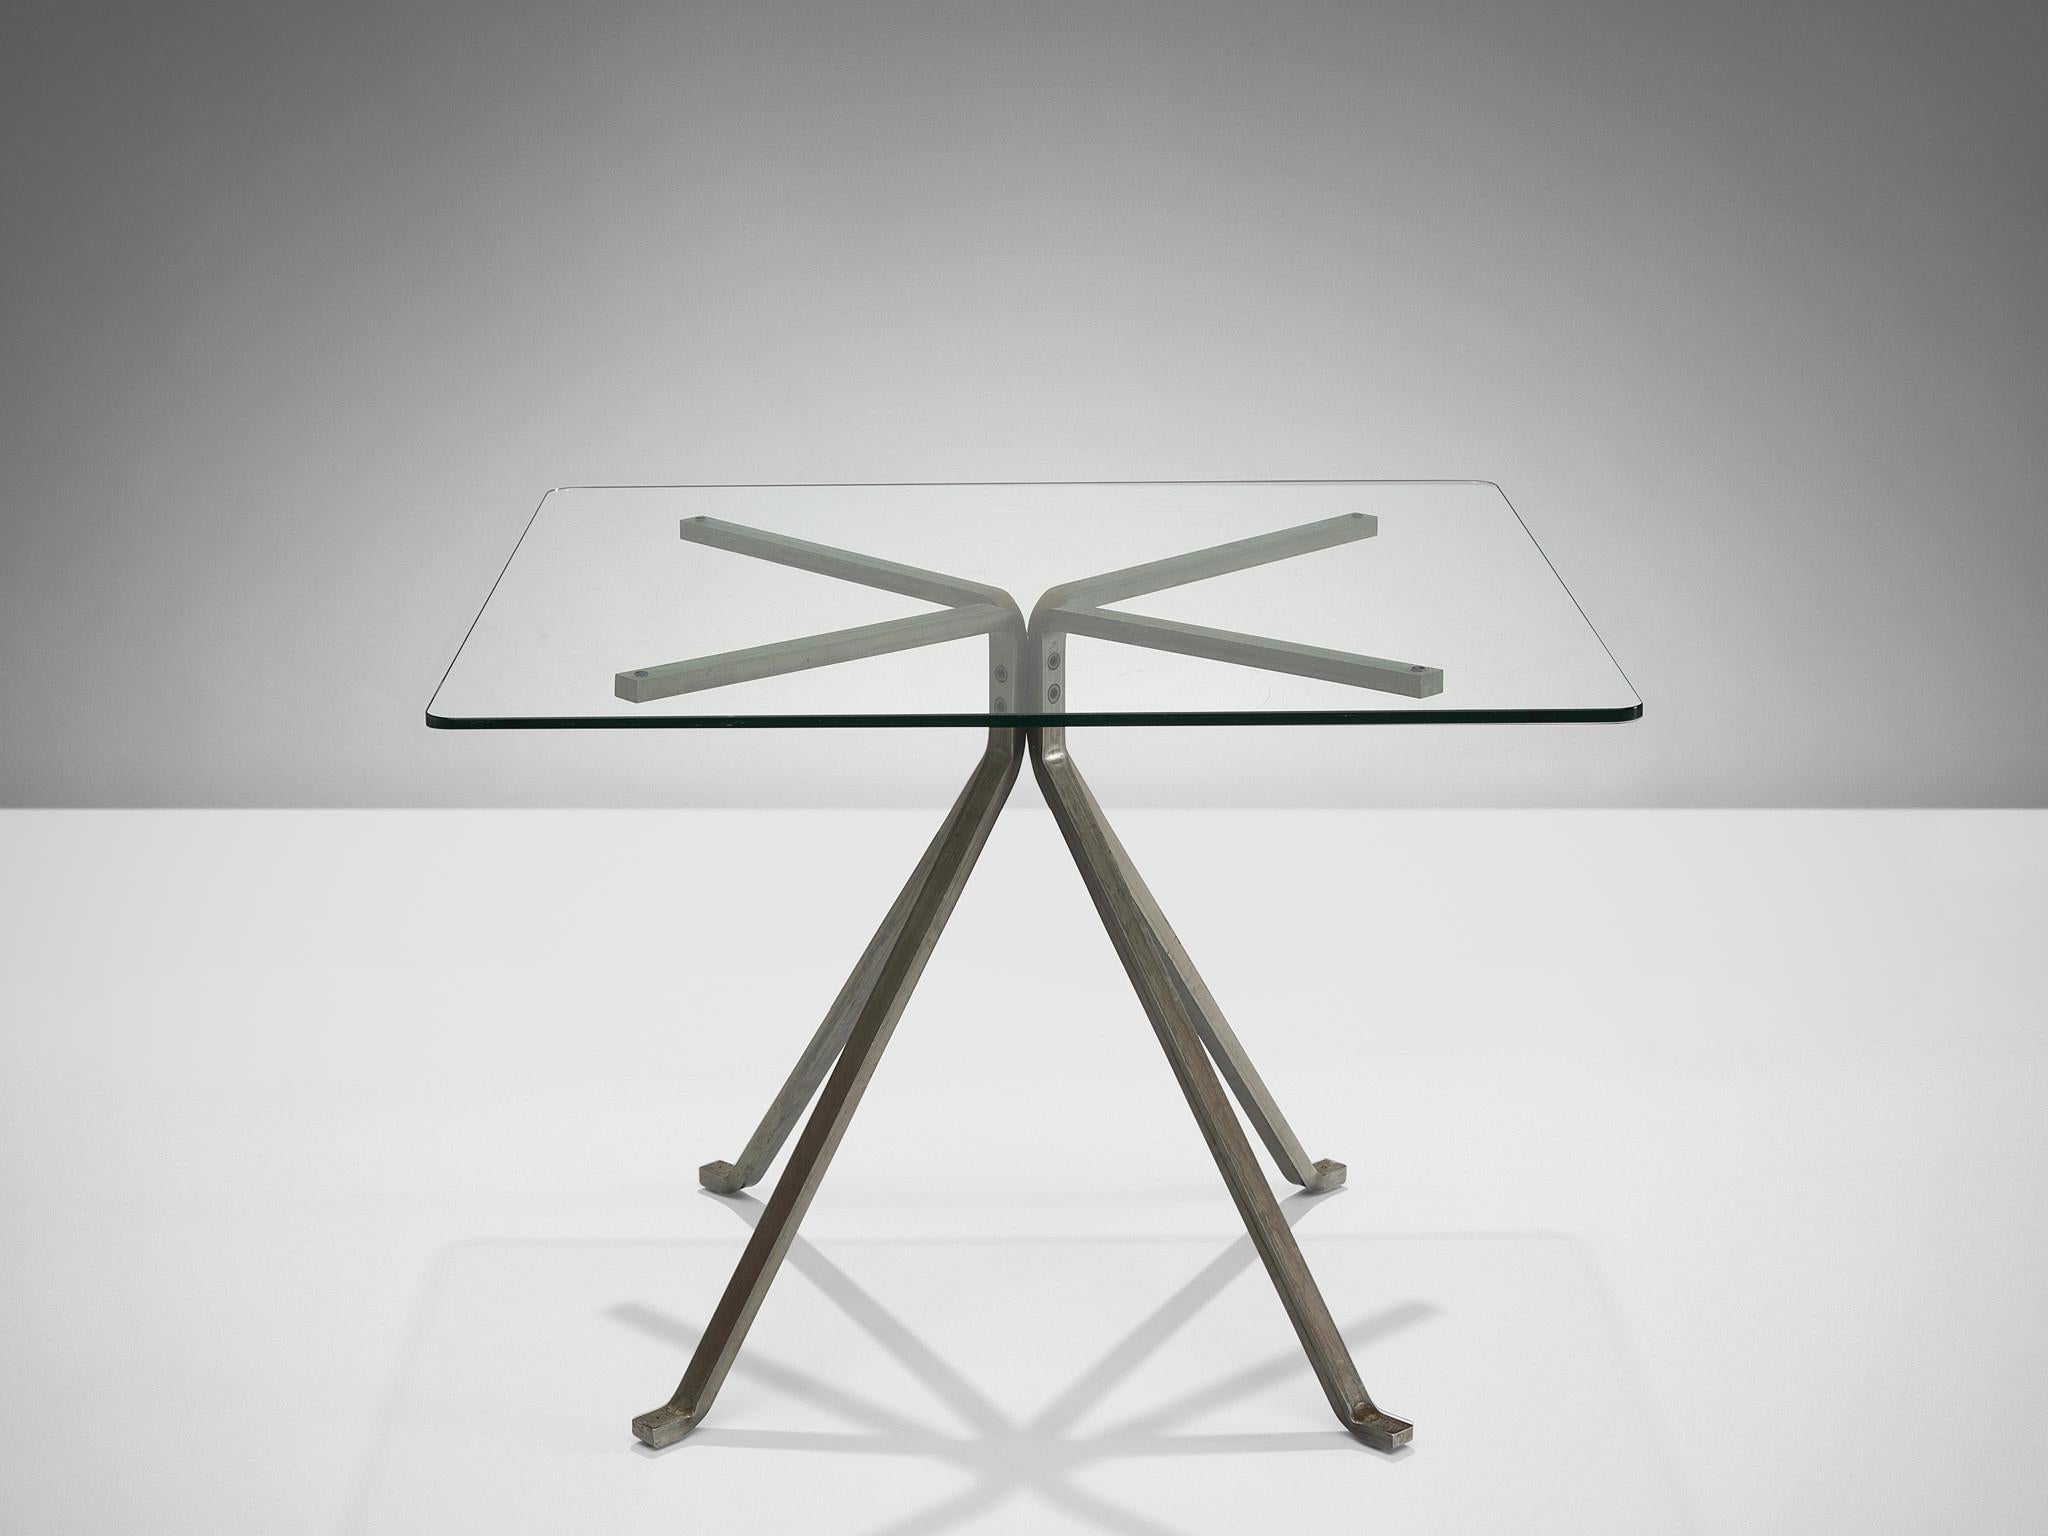 Enzo Mari for Driade, side table 'Cugino', glass, brushed steel, Italy, 1973.

This table features a clear construction. The base consists of four tapered legs executed in black anthracite steel that holds the square glass top in place. The